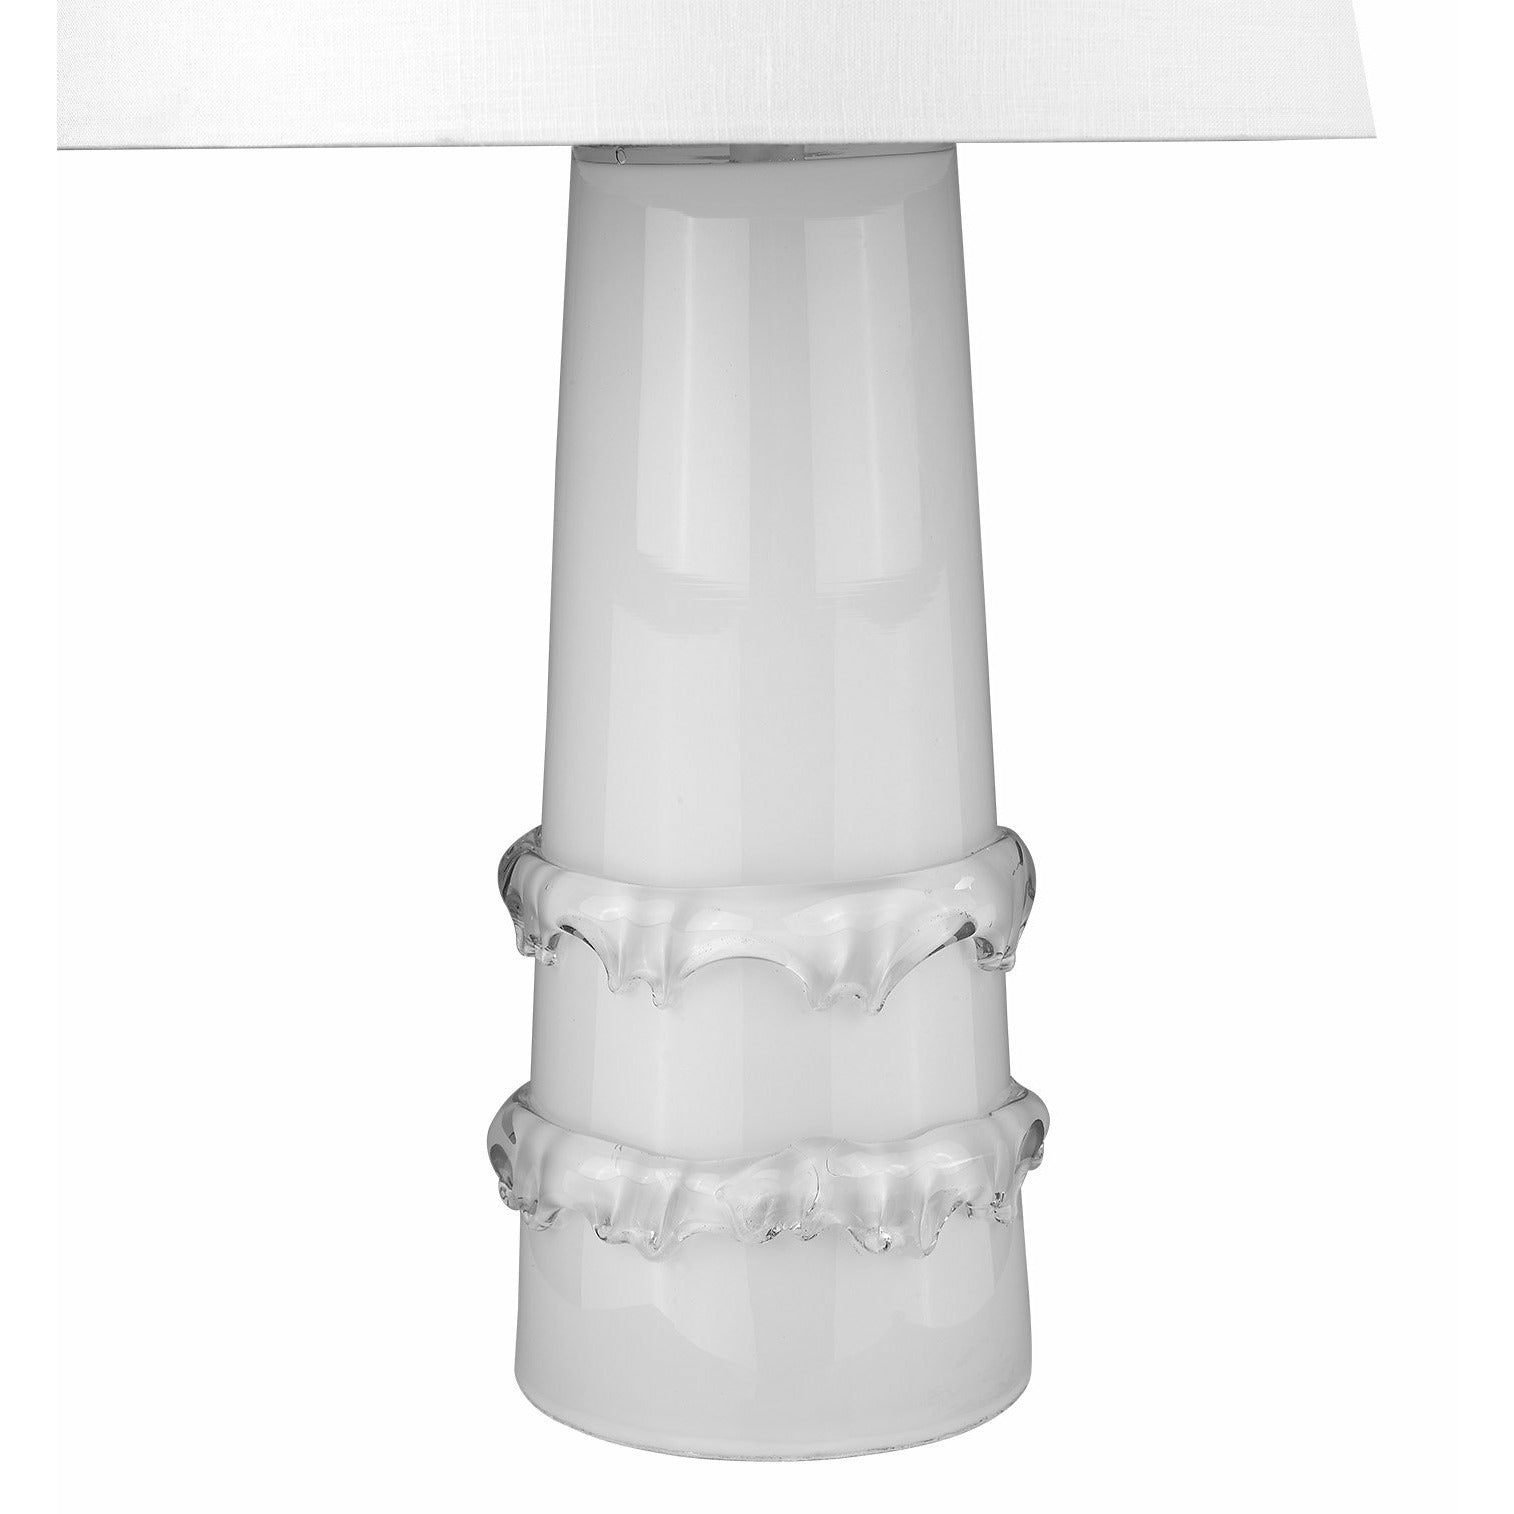 Trend Home Table Lamp White